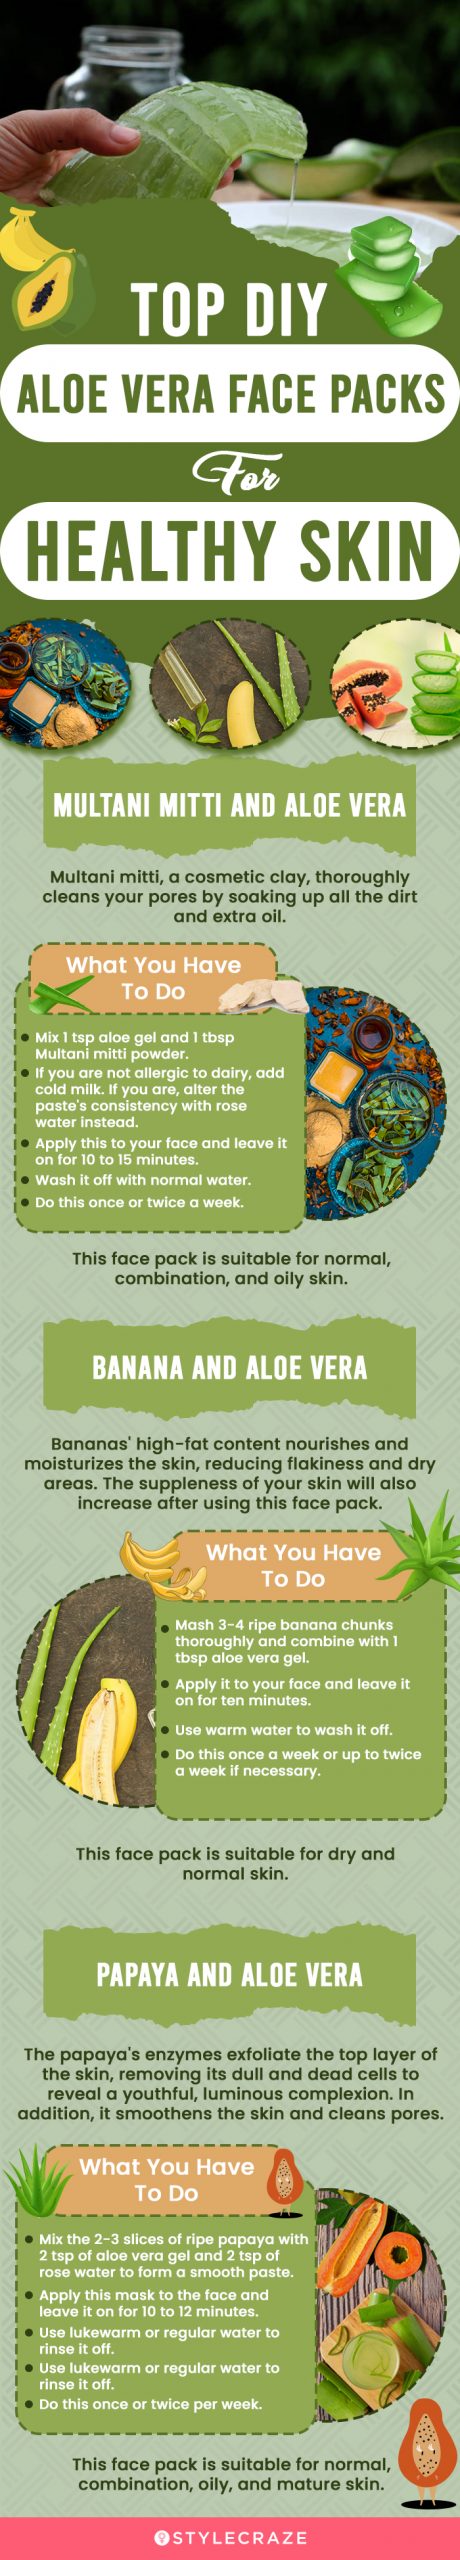 top diy aloevera face packs for healthy skin [infographic]